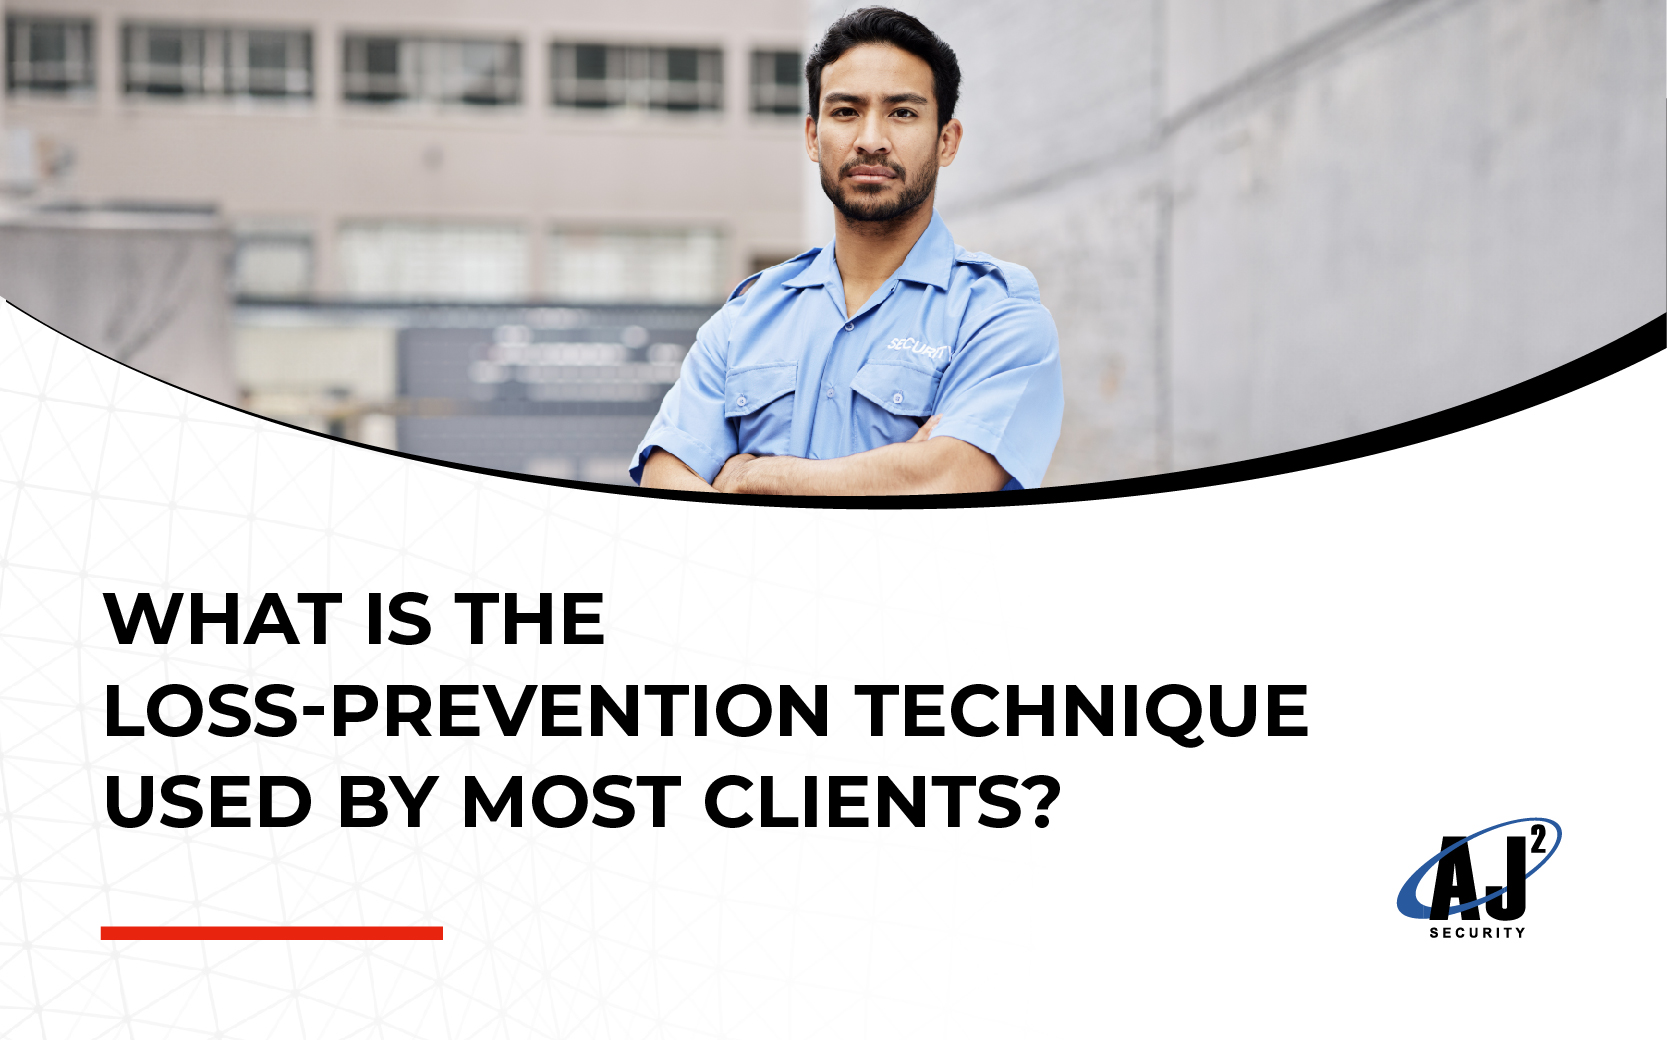 What Is the Loss Prevention Technique Used by Most Clients